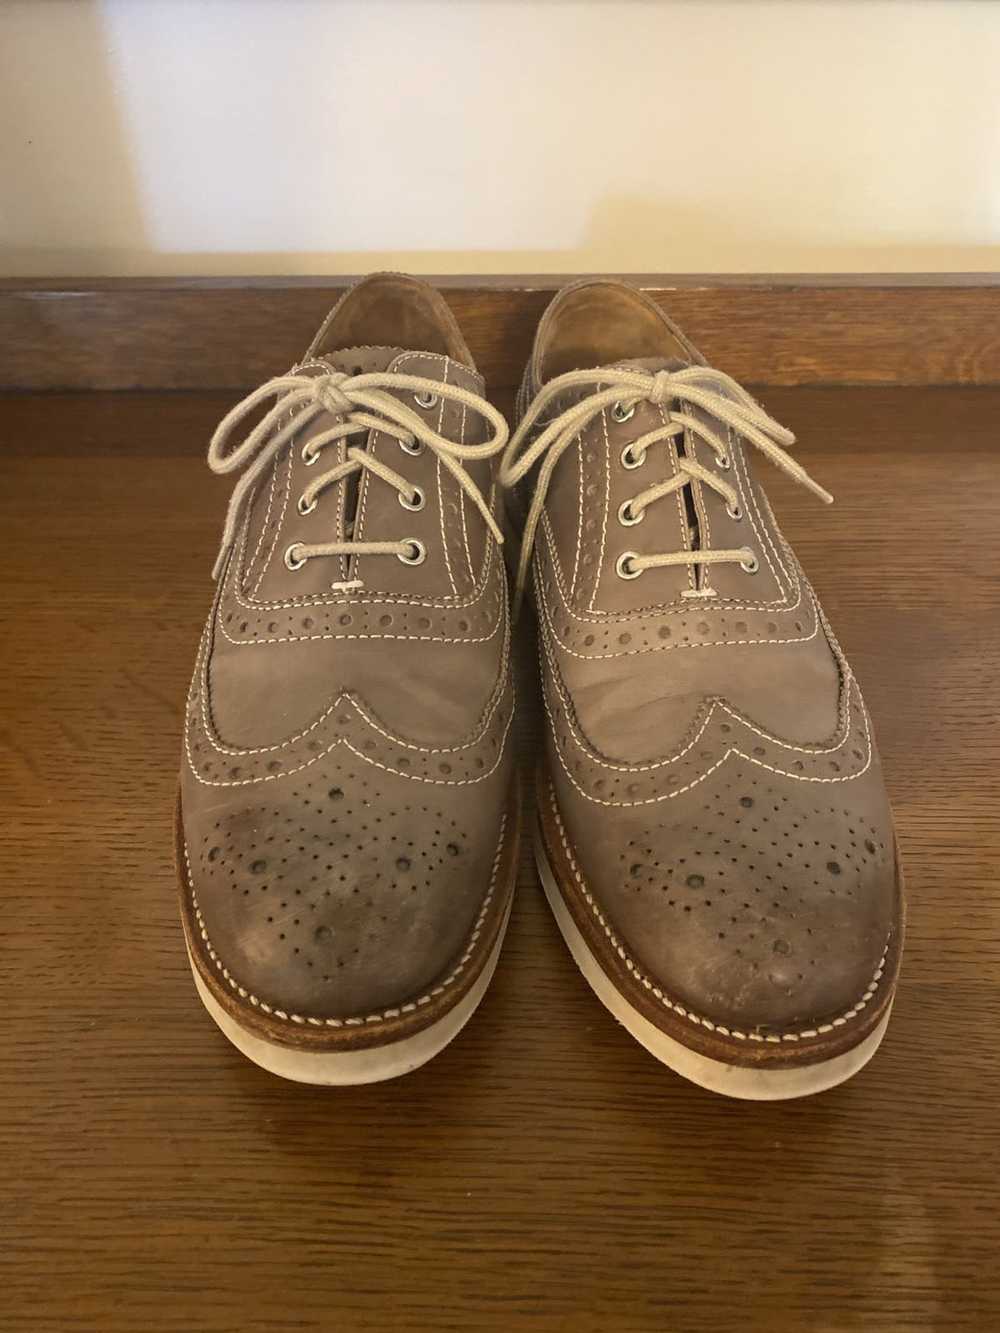 Grenson Oxford Shoes - image 2